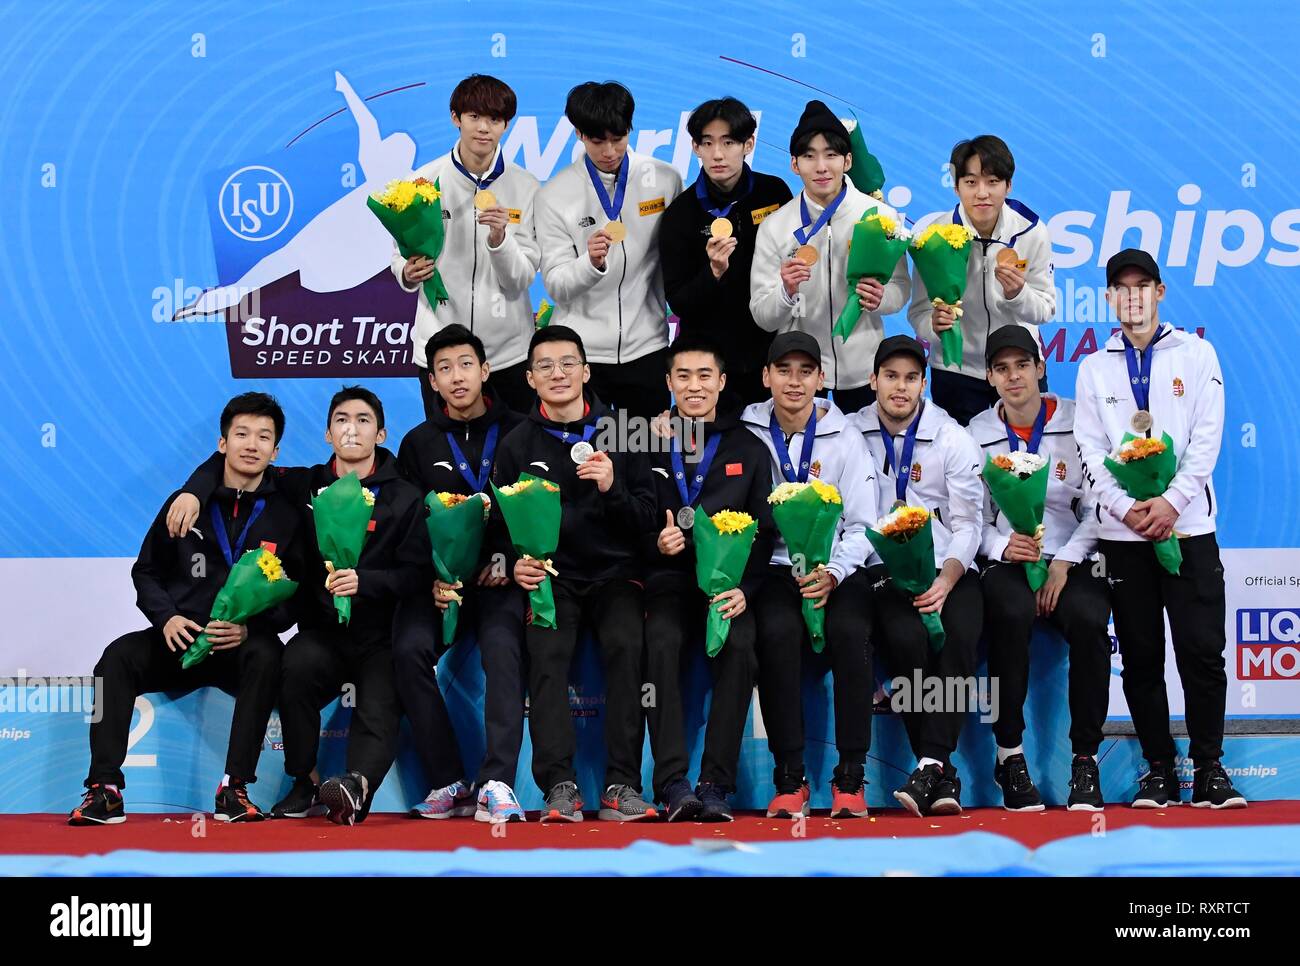 ISU Short Track World Championships on March 10 2019 at the Arena Armeec in Sofia, Bulgaria. Podium 5000 meters relay men. Credit: Soenar Chamid/SCS/AFLO/Alamy Live News Stock Photo